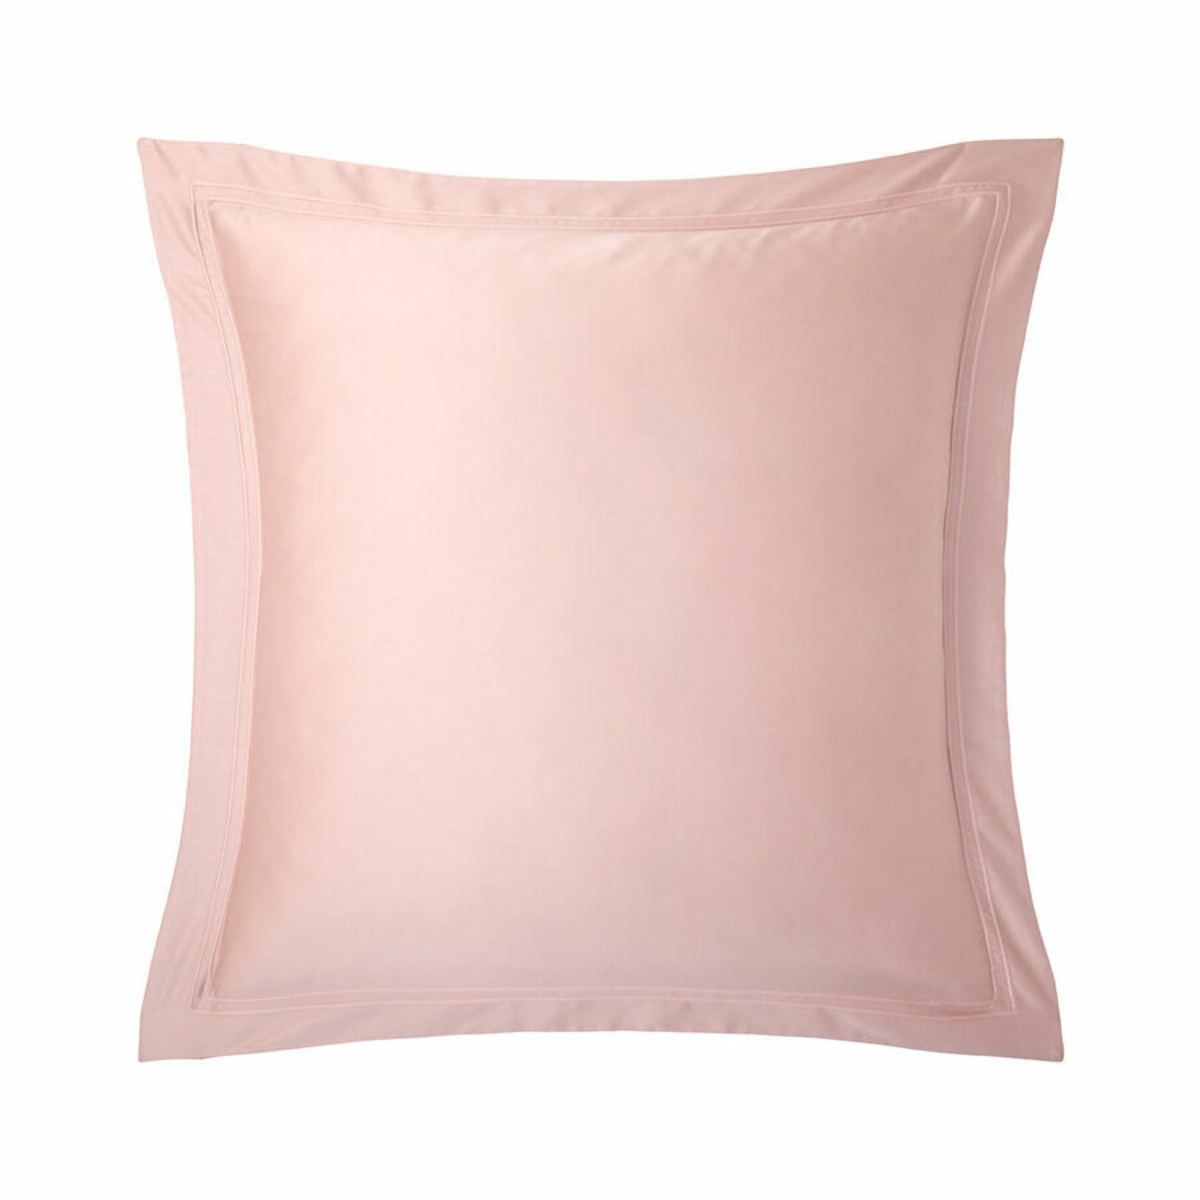 Euro Sham of Yves Delorme Triomphe Bedding in Poudre Color